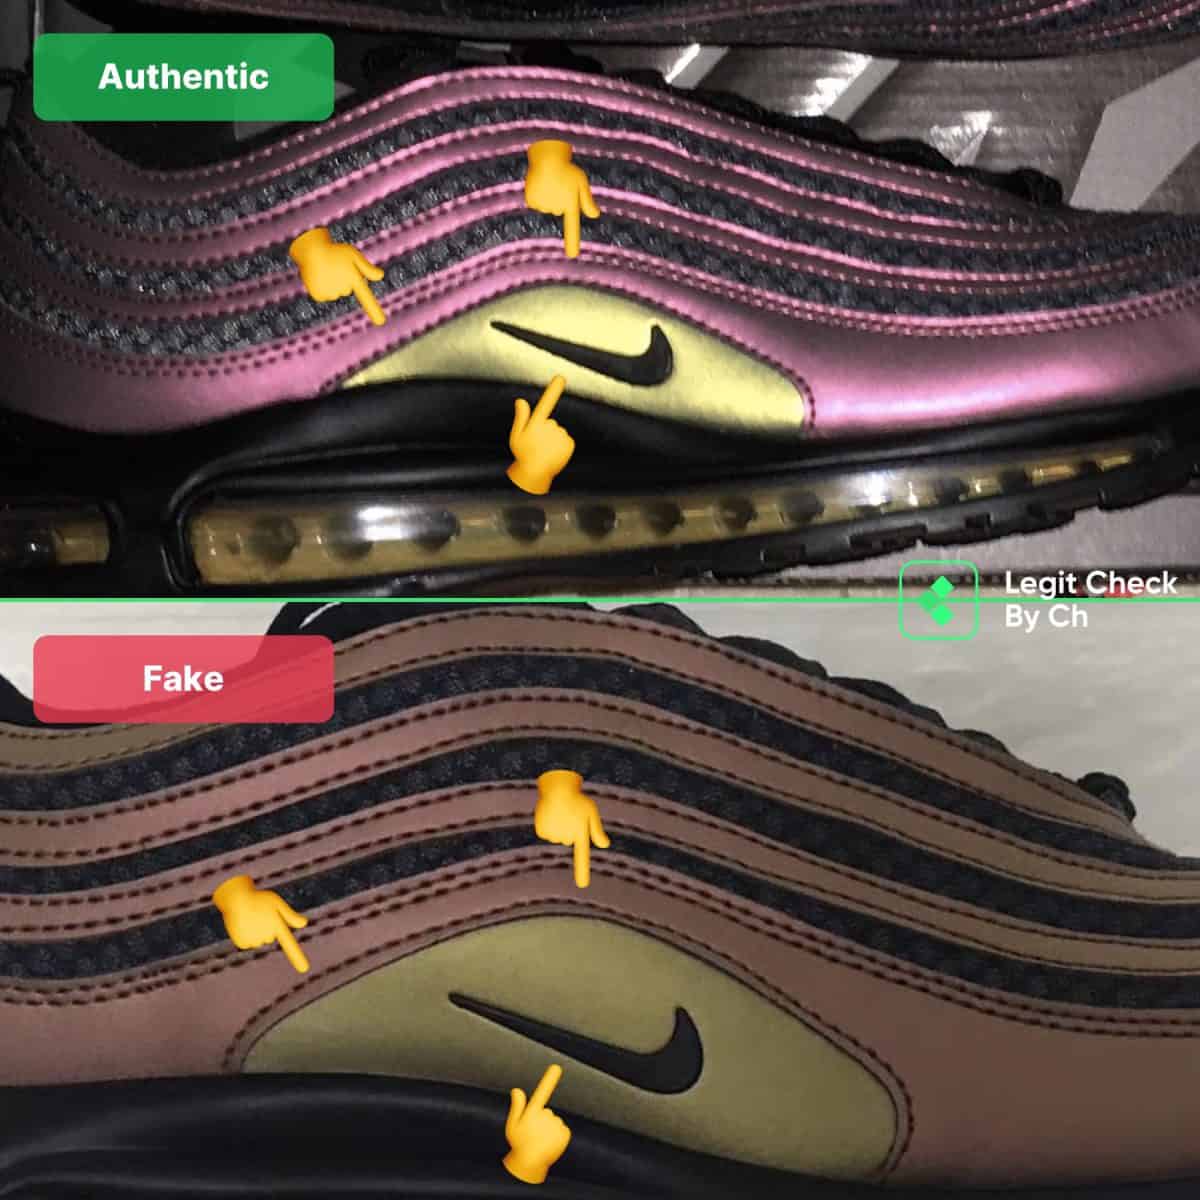 How Spot Fake Skepta Max 97 Ultra - Legit Check By Ch